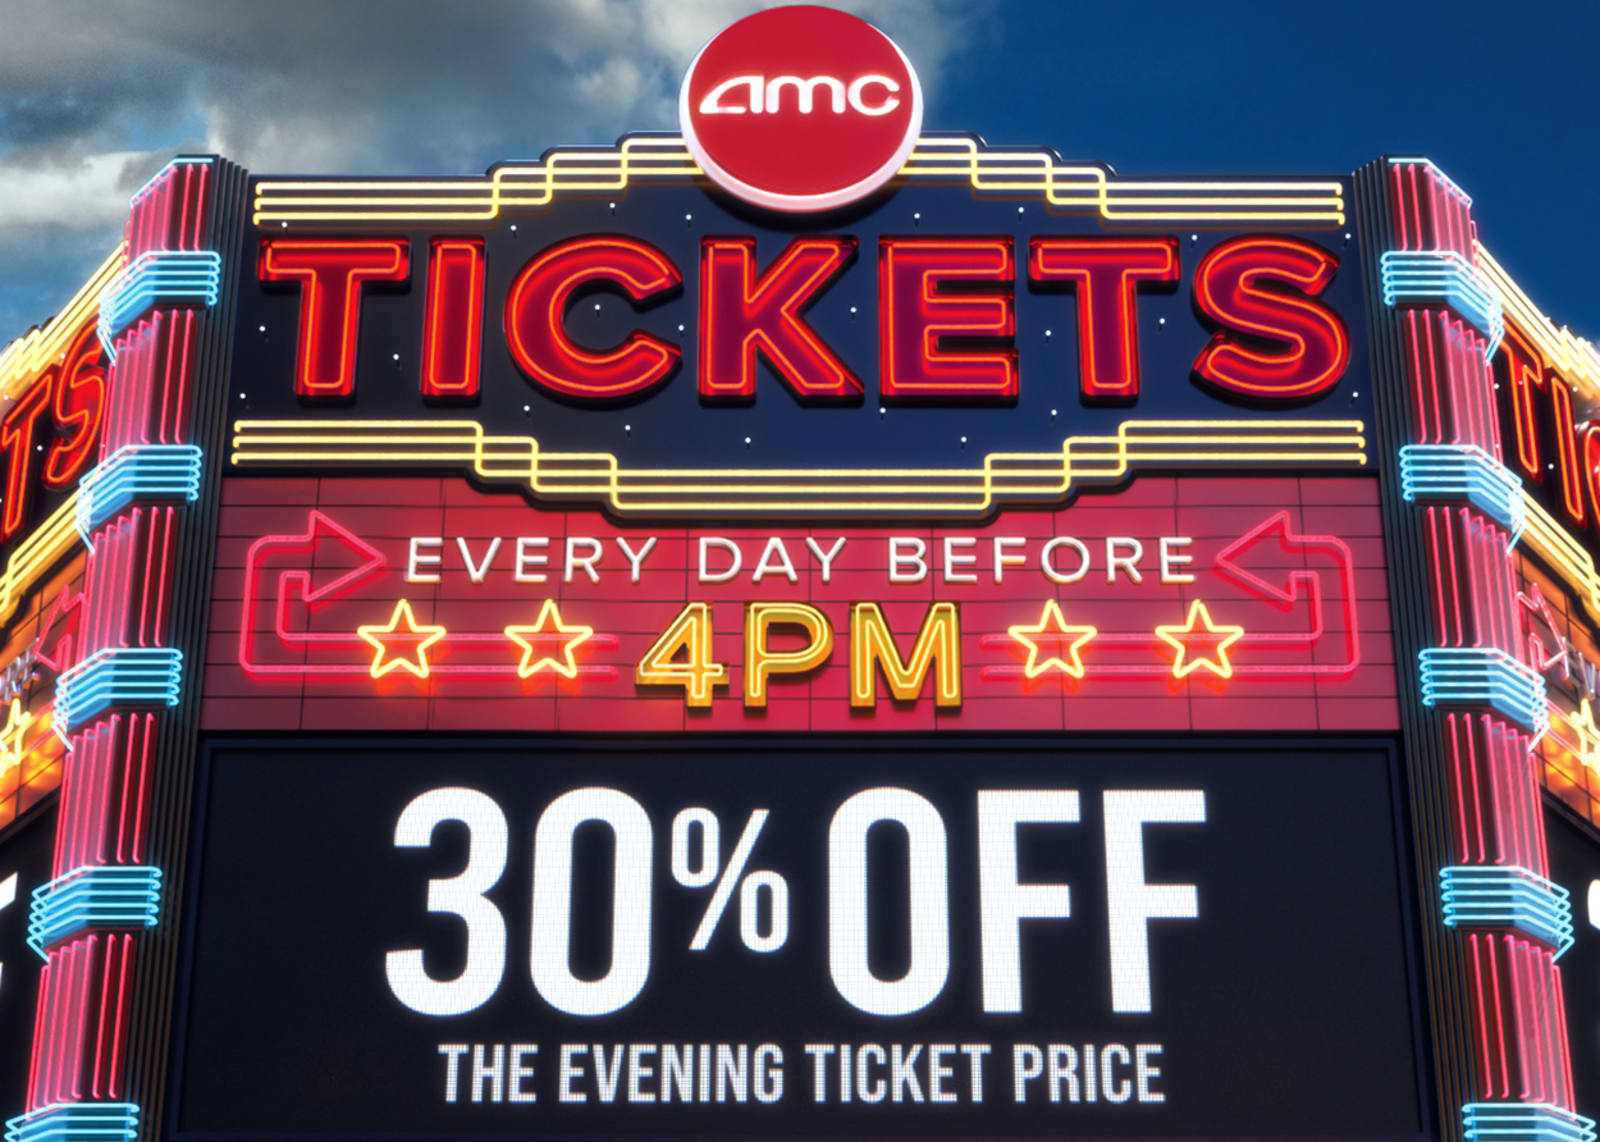 AMC Theater discounts make it one of the NJ cheap movie theaters near me.